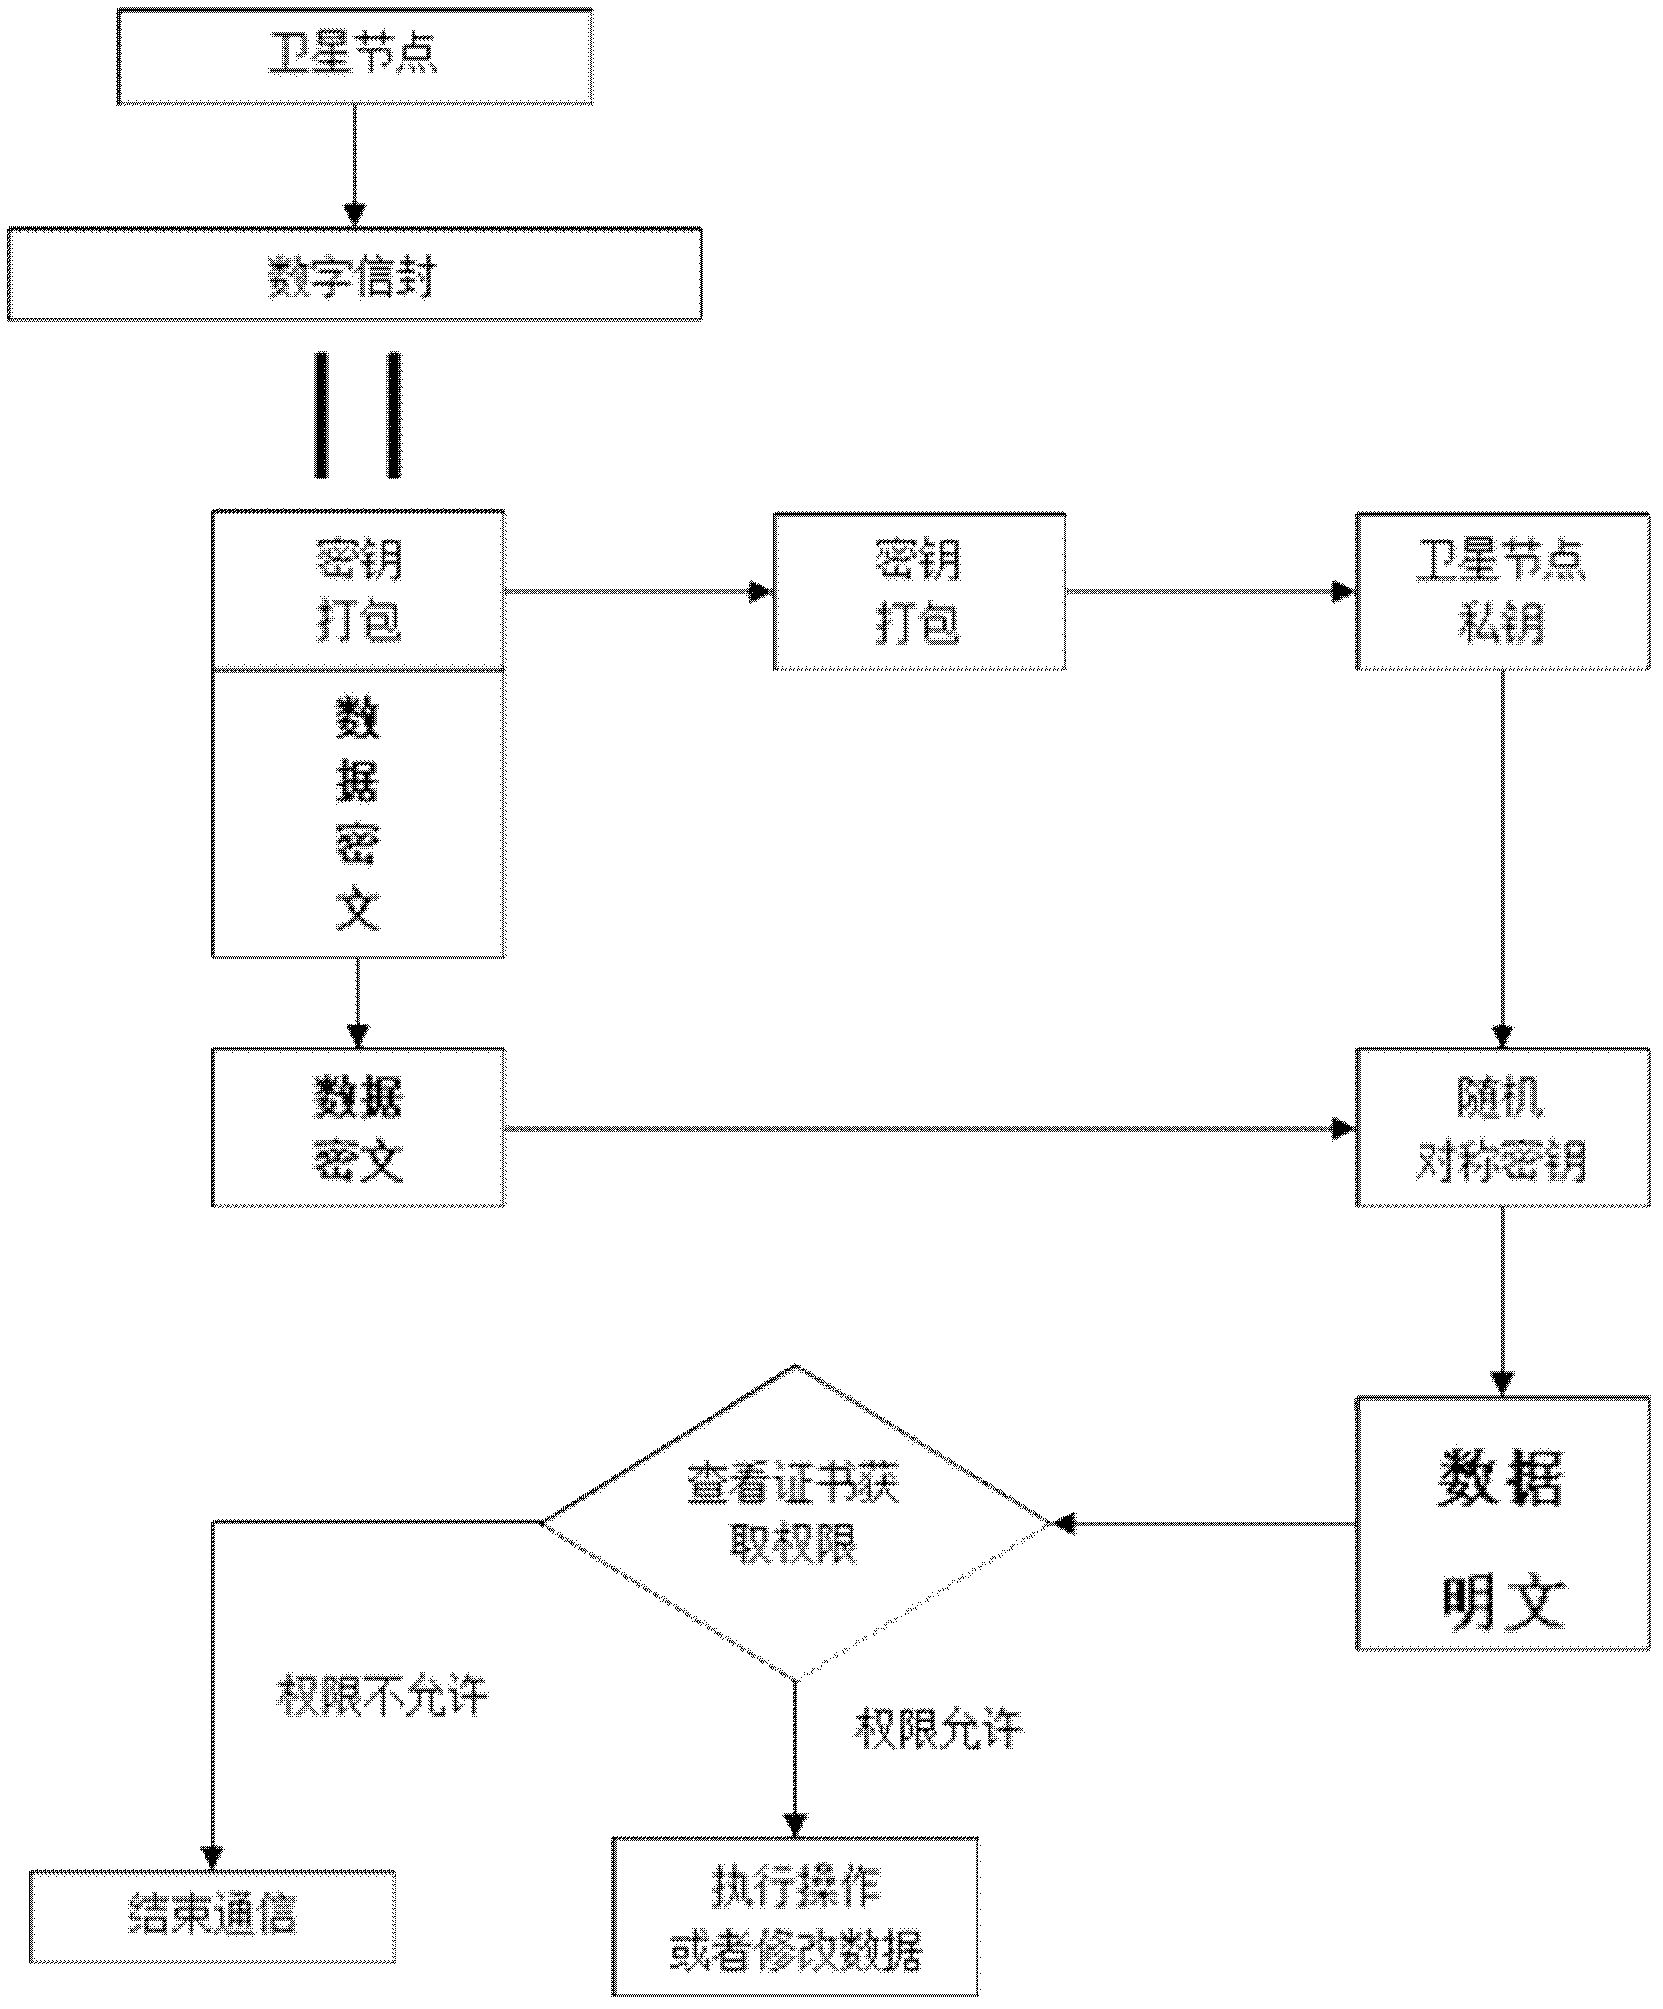 Credible authentication system between ground network operation control center and satellite under environment of interconnection of mobile grids